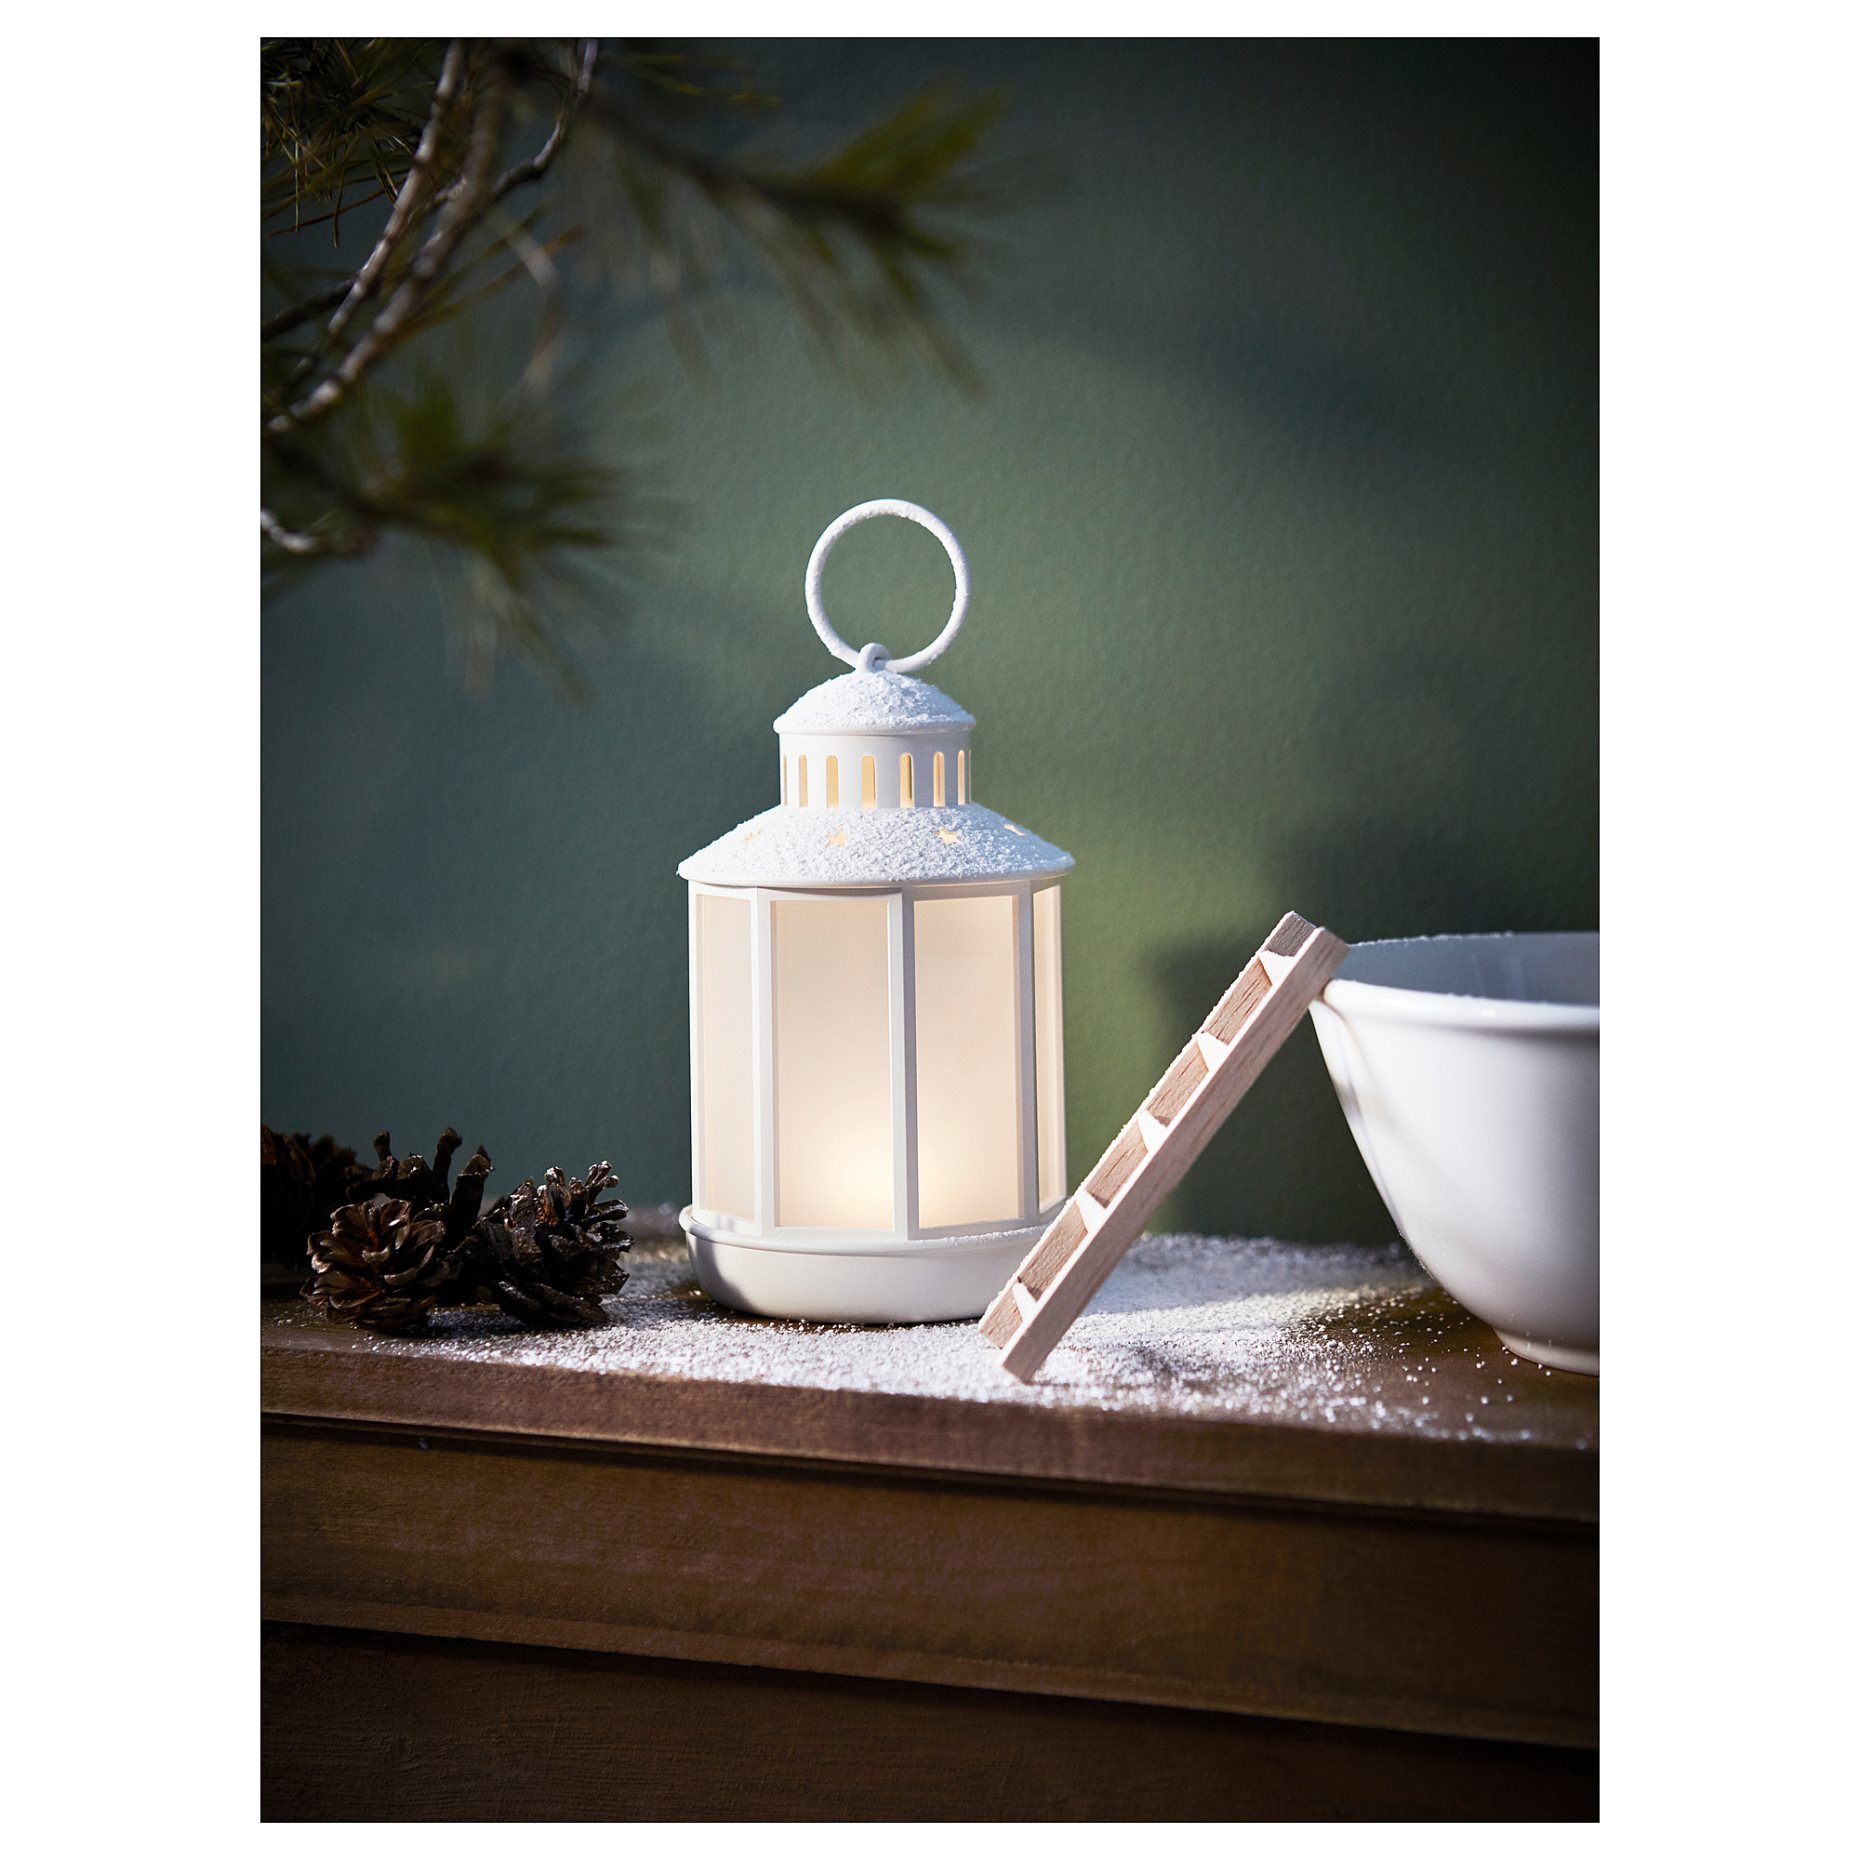 STRÅLA, lantern with built-in LED light source/battery-operated, 13 cm, 405.633.52